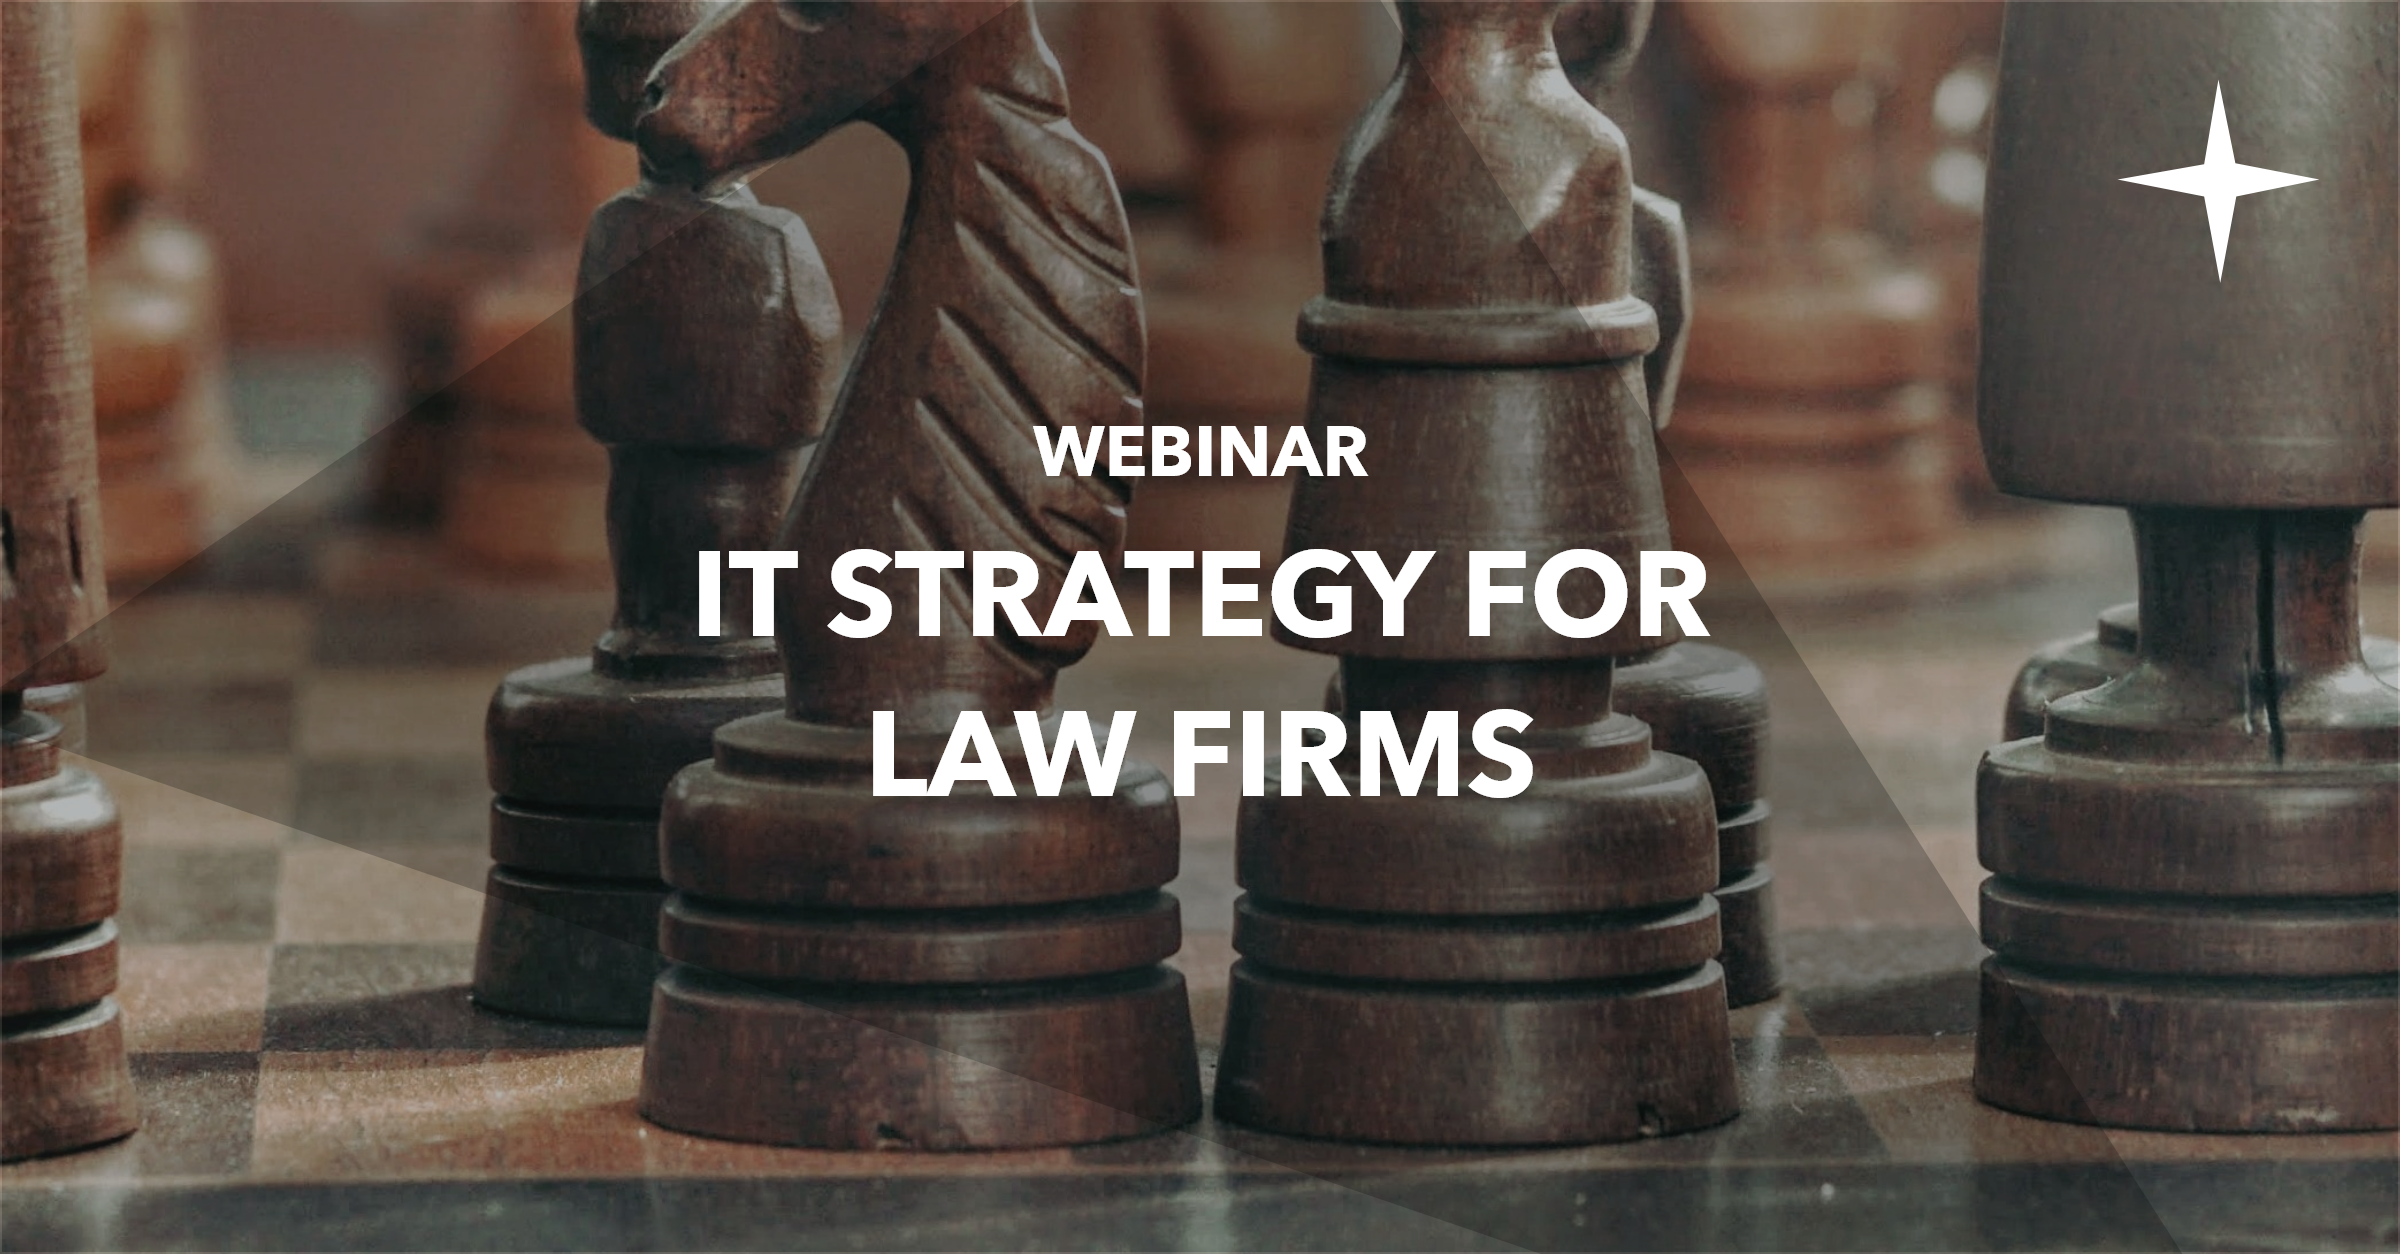 On Demand Webinar - IT Strategy for Law Firms